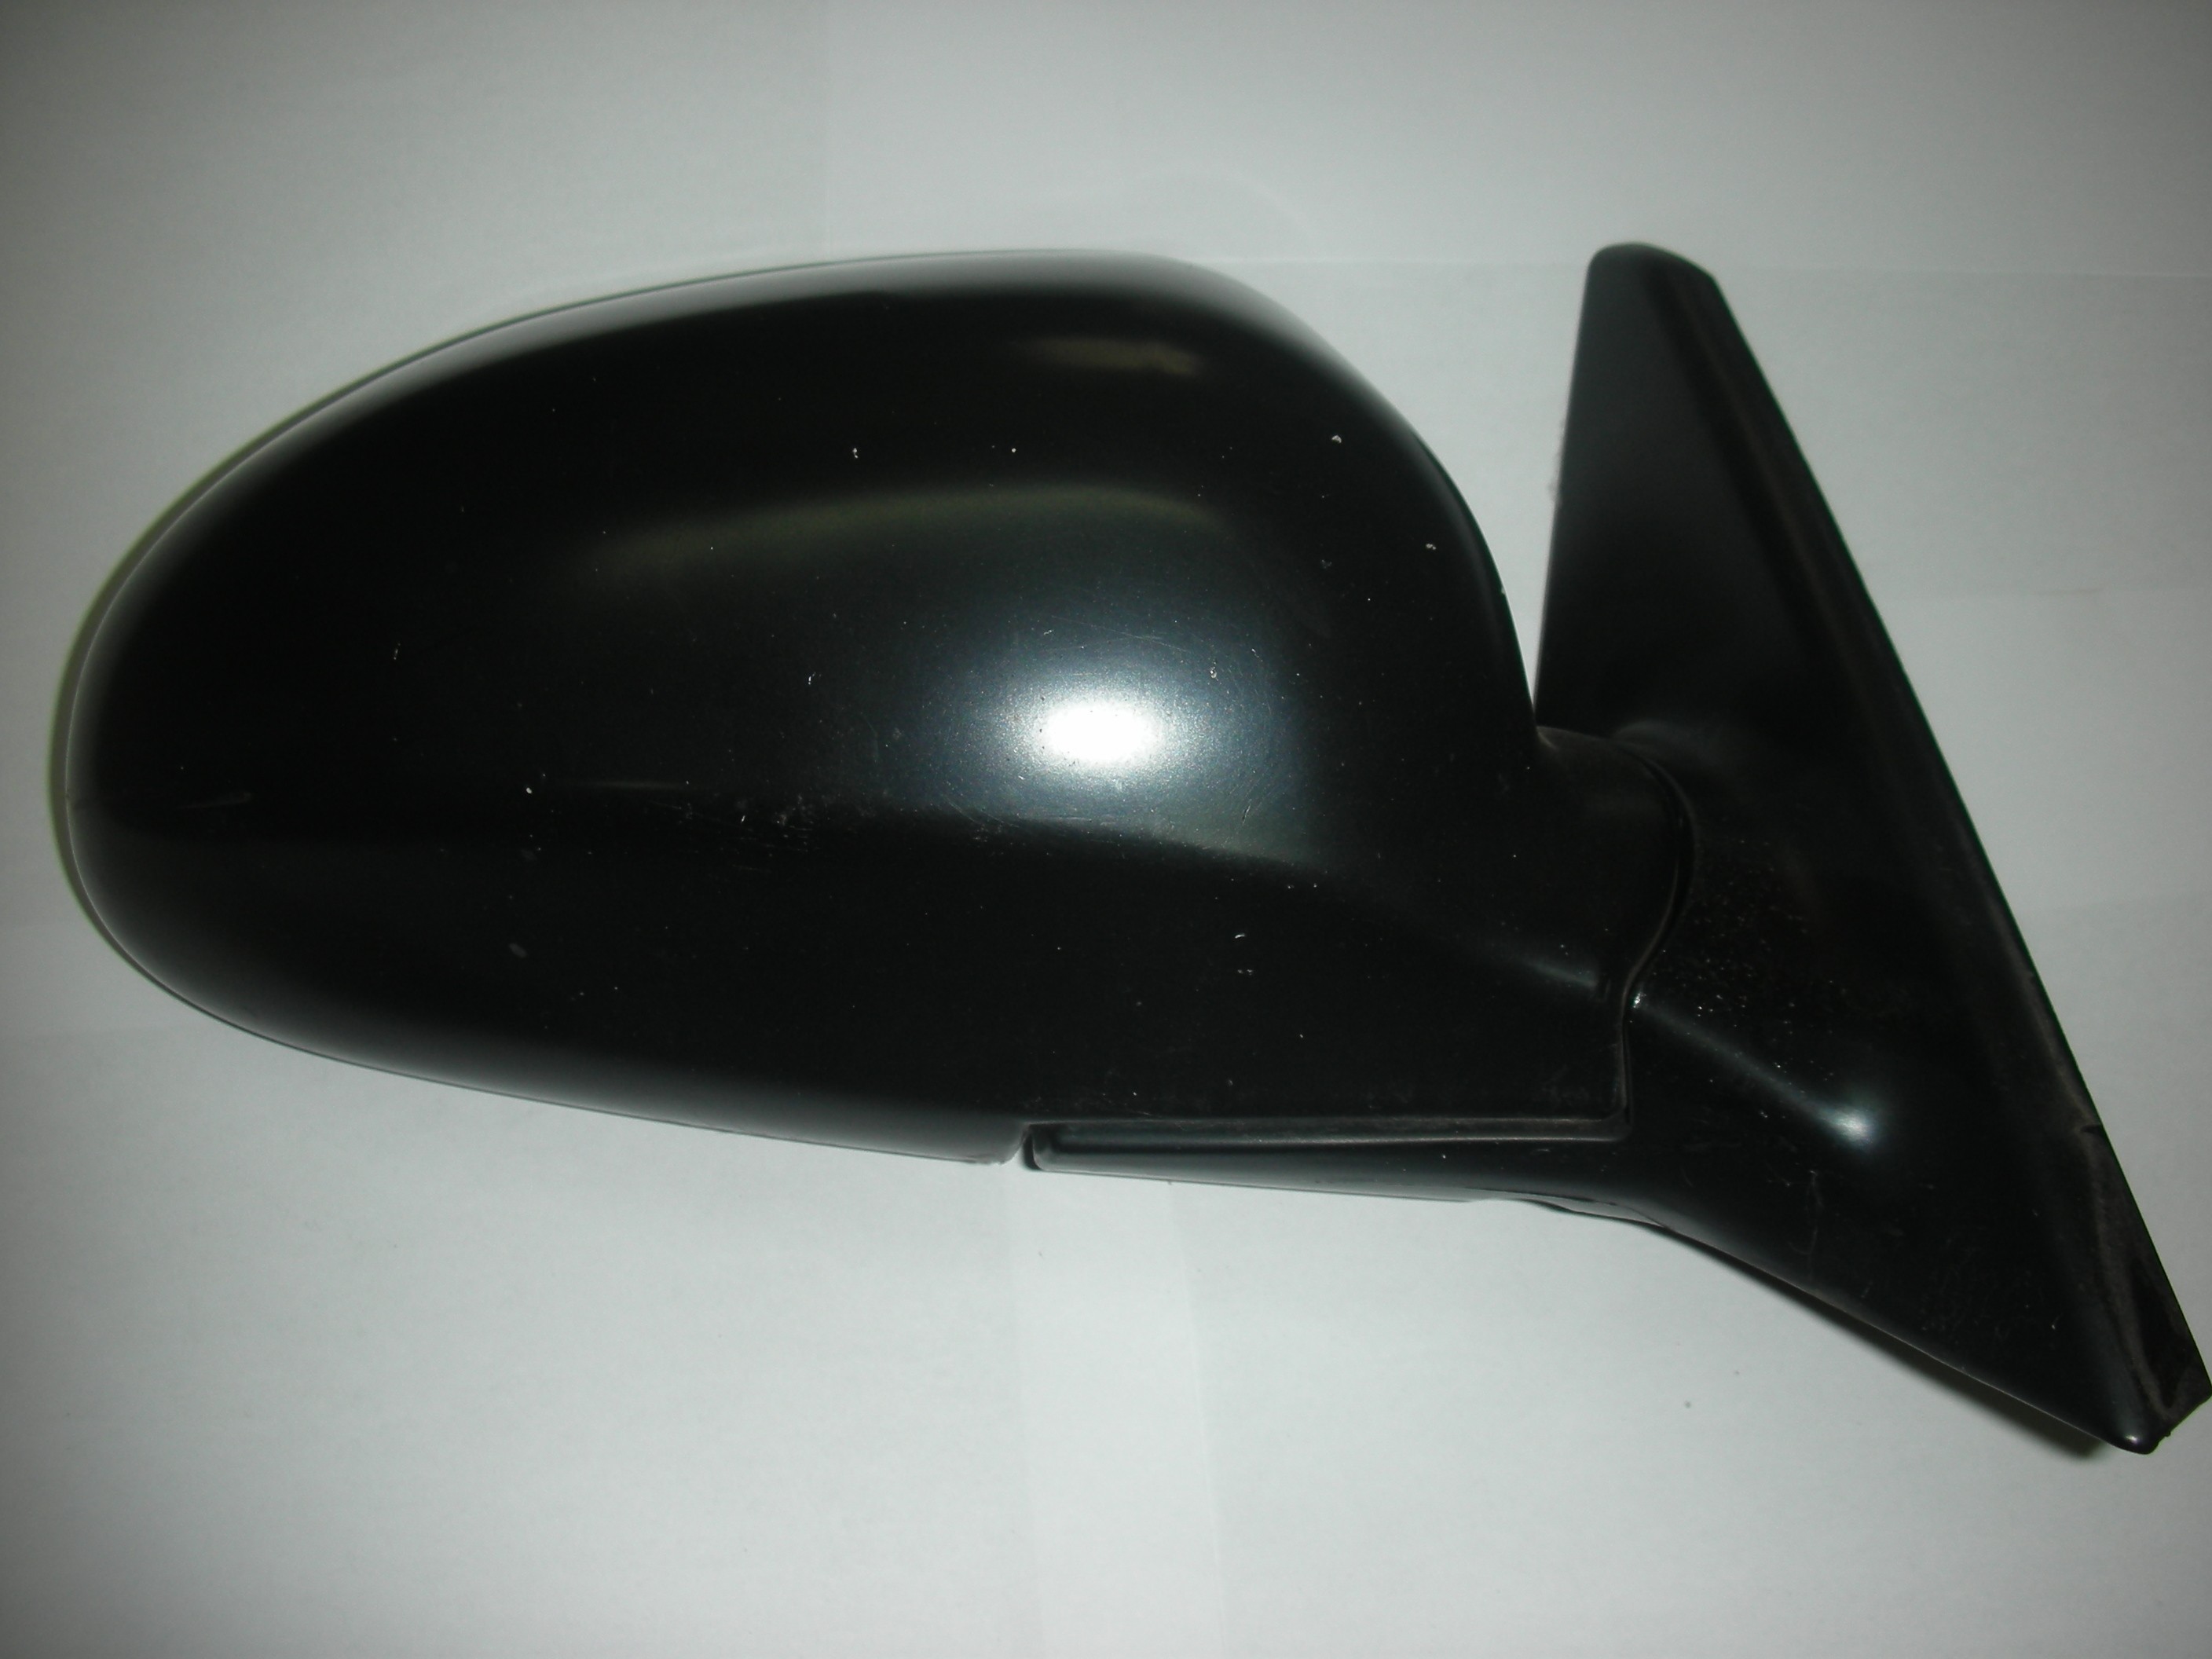 HYUNDAI COUPE DRIVER SIDE FRONT DOOR MIRROR 1998-1999.